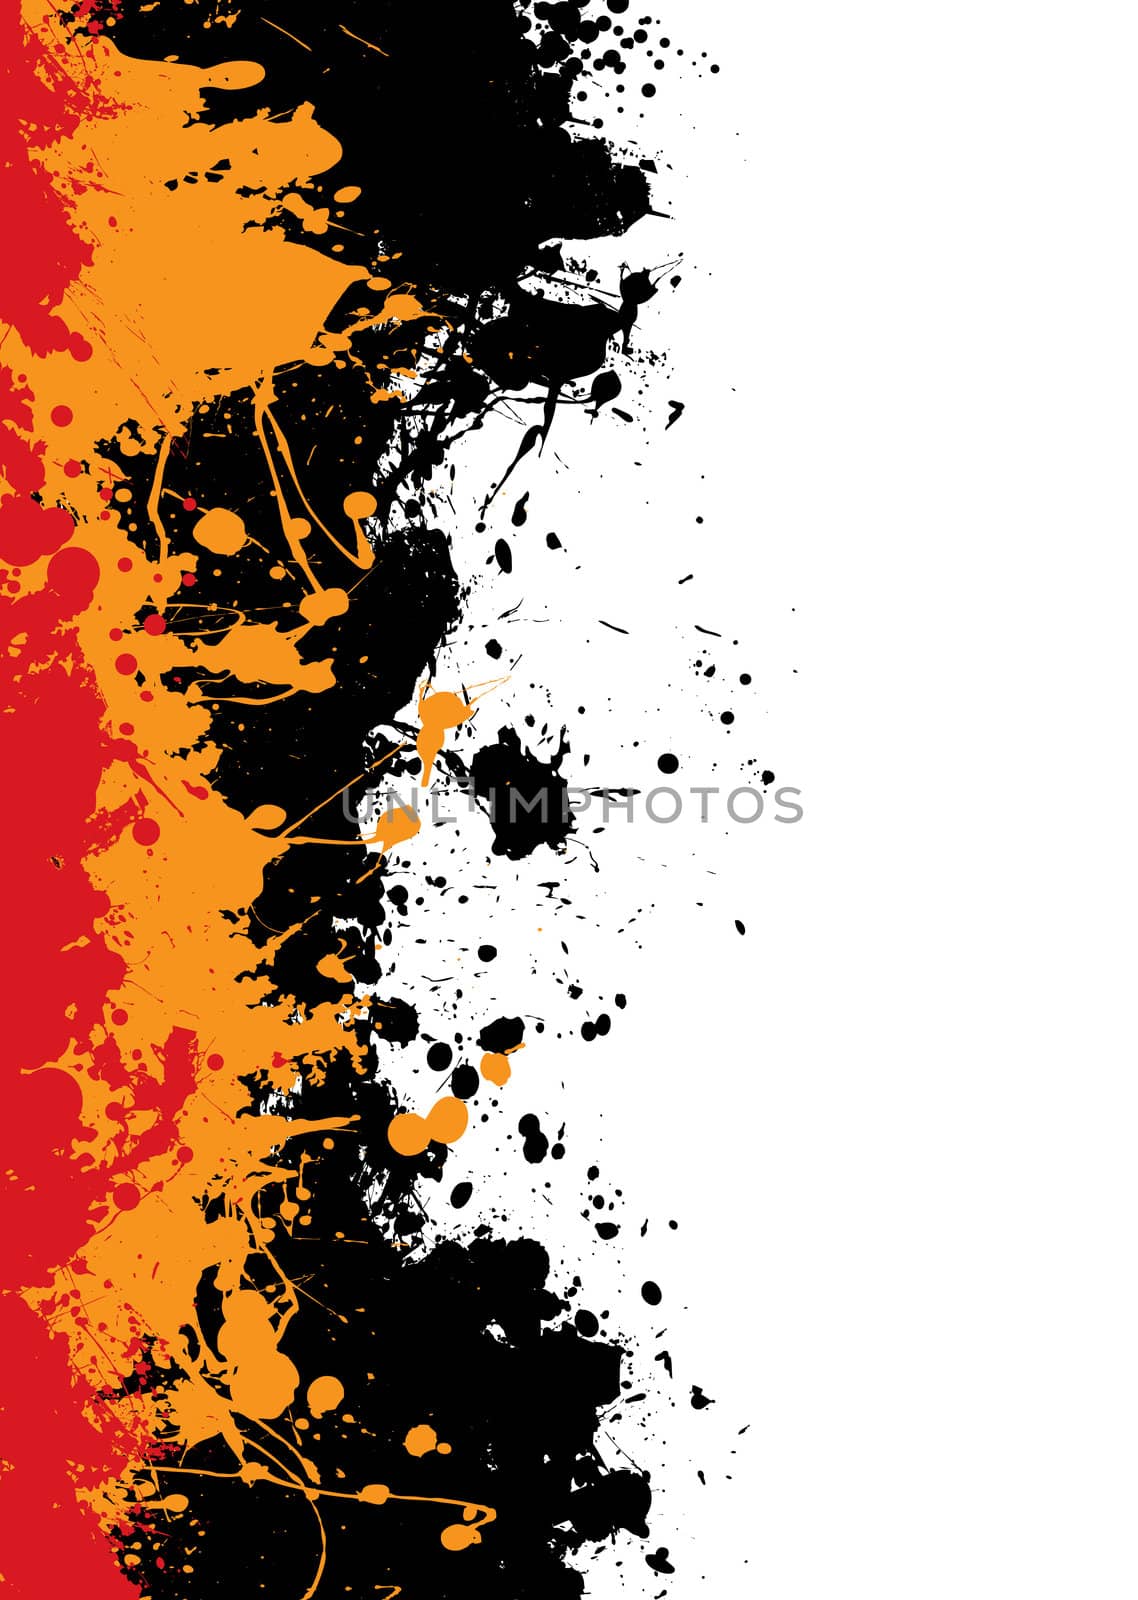 Grunge ink splat background with orange and red paint